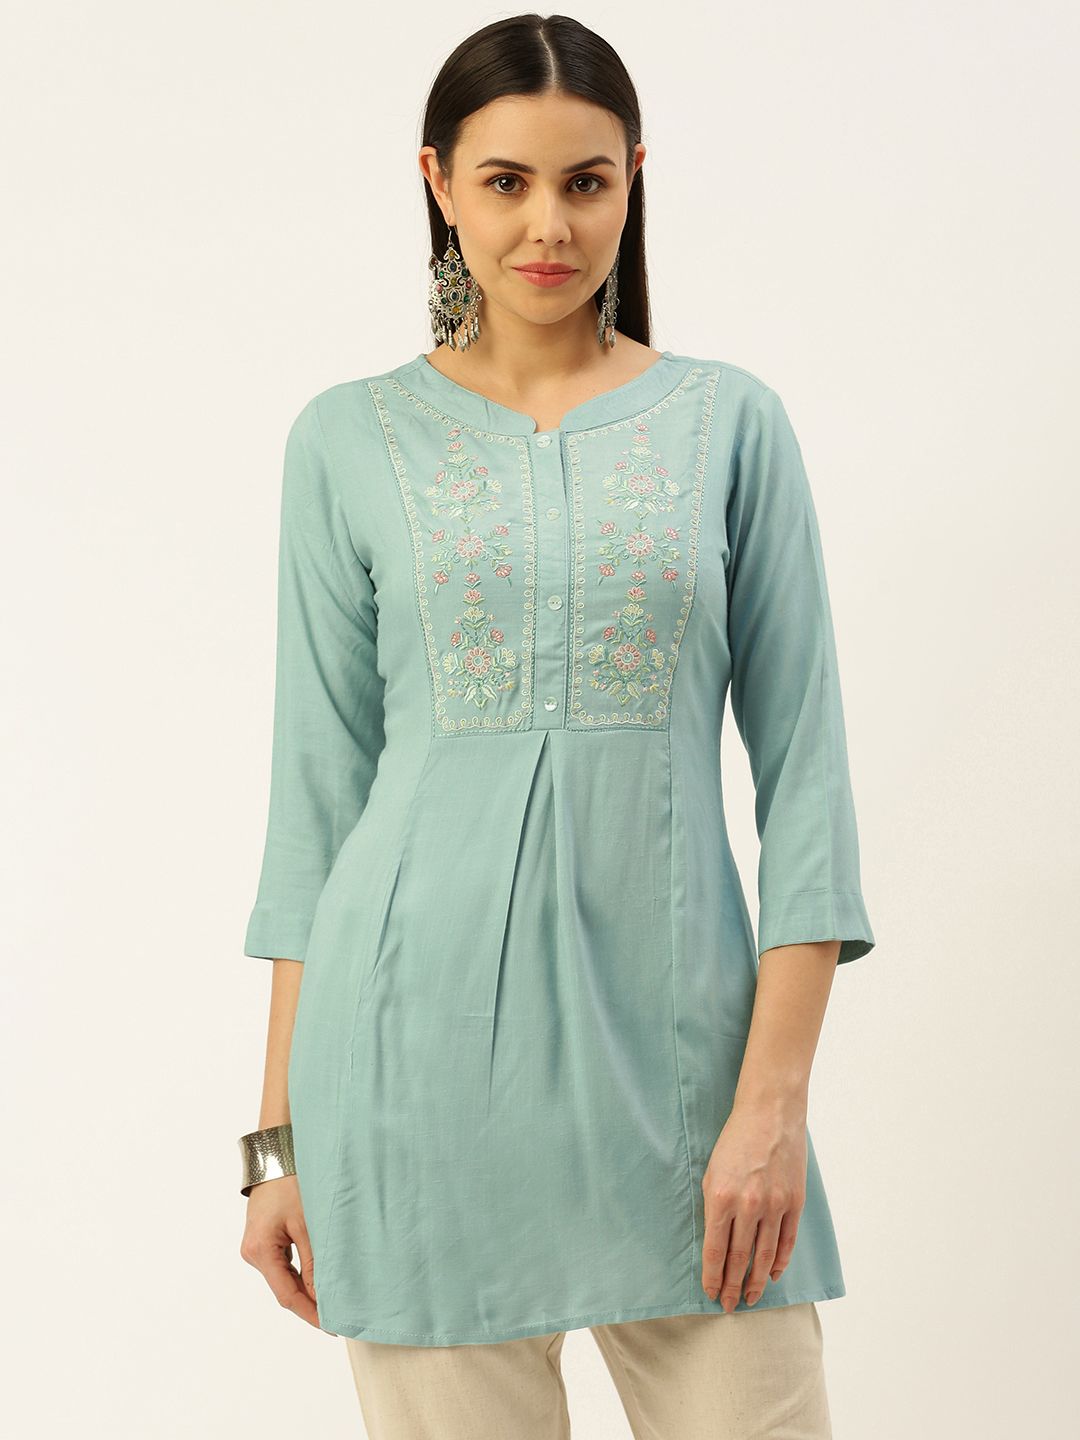 RACHNA Green Floral Embroidered Thread Work Kurti Price in India